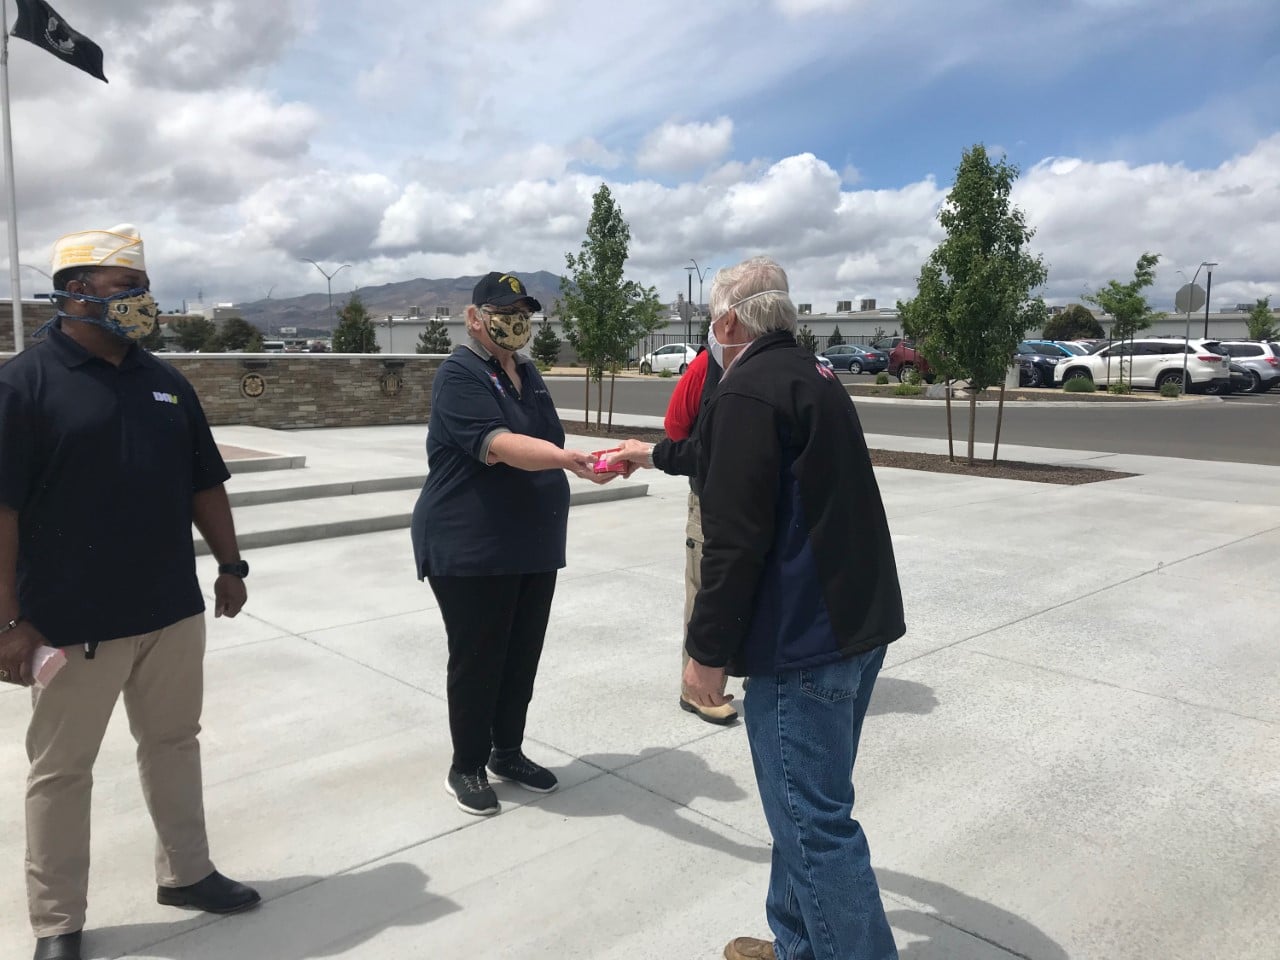 Local 169 presented $5,000 worth of gift cards to four veterans' organizations: the State Commanders of the American Legion, Disabled American Veterans, Veterans of Foreign Wars and Vietnam Veterans of America.